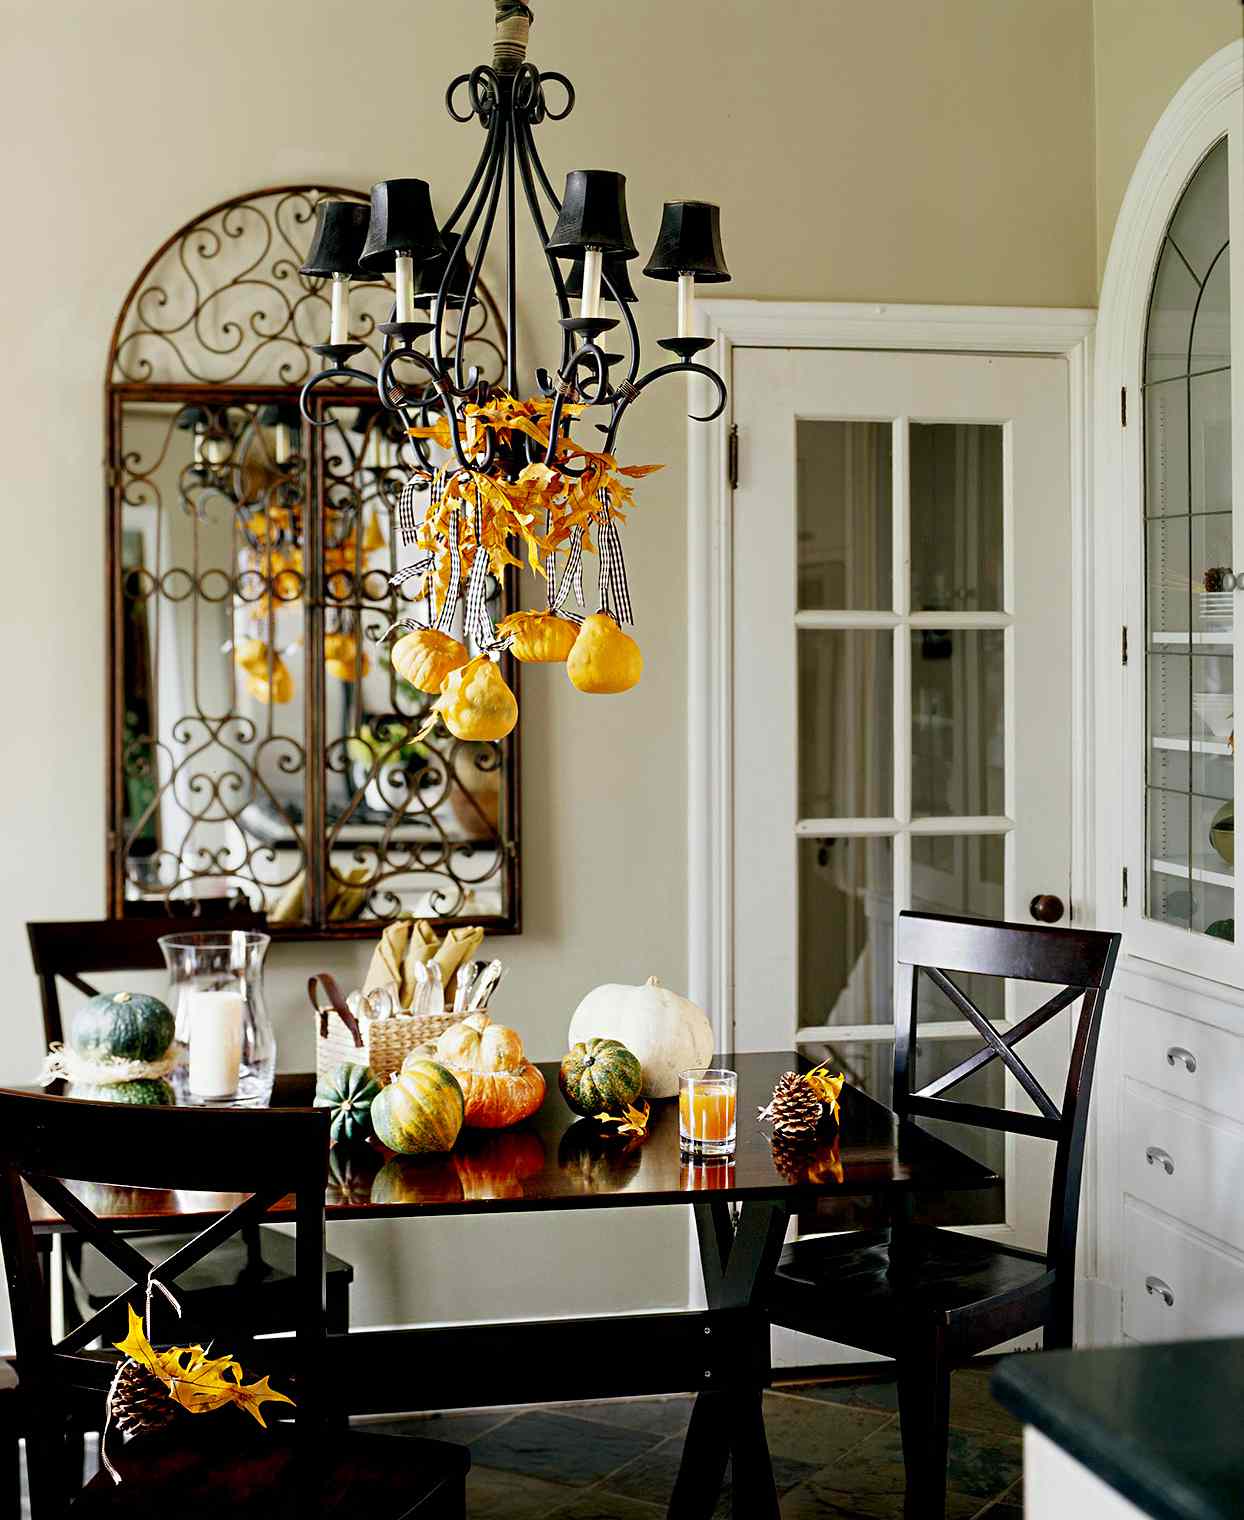 Dining room with wood furniture and pumpkin and pear decor